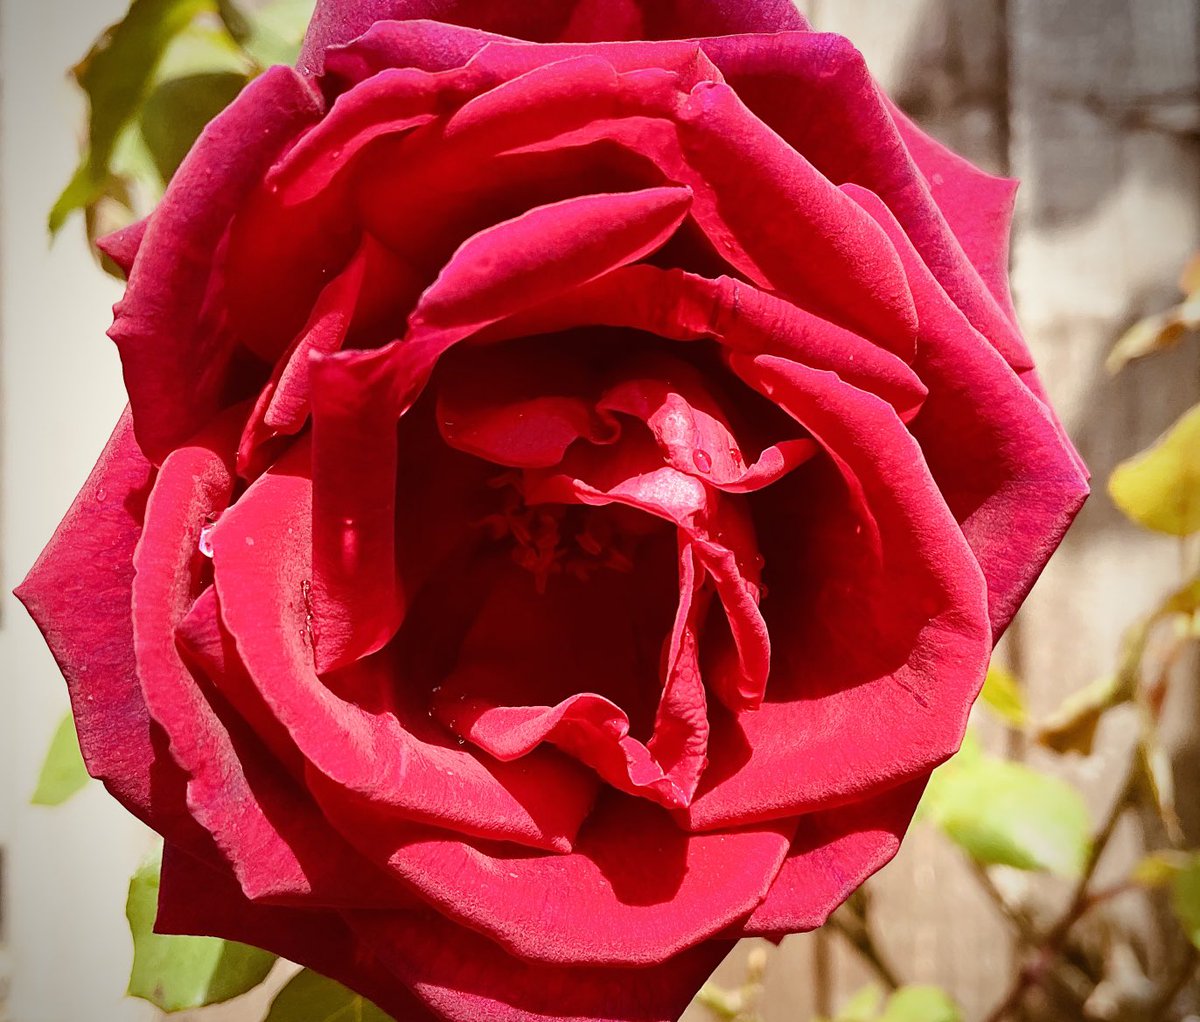 Well, four hours of scrubbing, Kärchering and oiling the decking wasn’t fun, but on the plus side, the first rose of the season has just shown its face, and it looks & smells lovely.